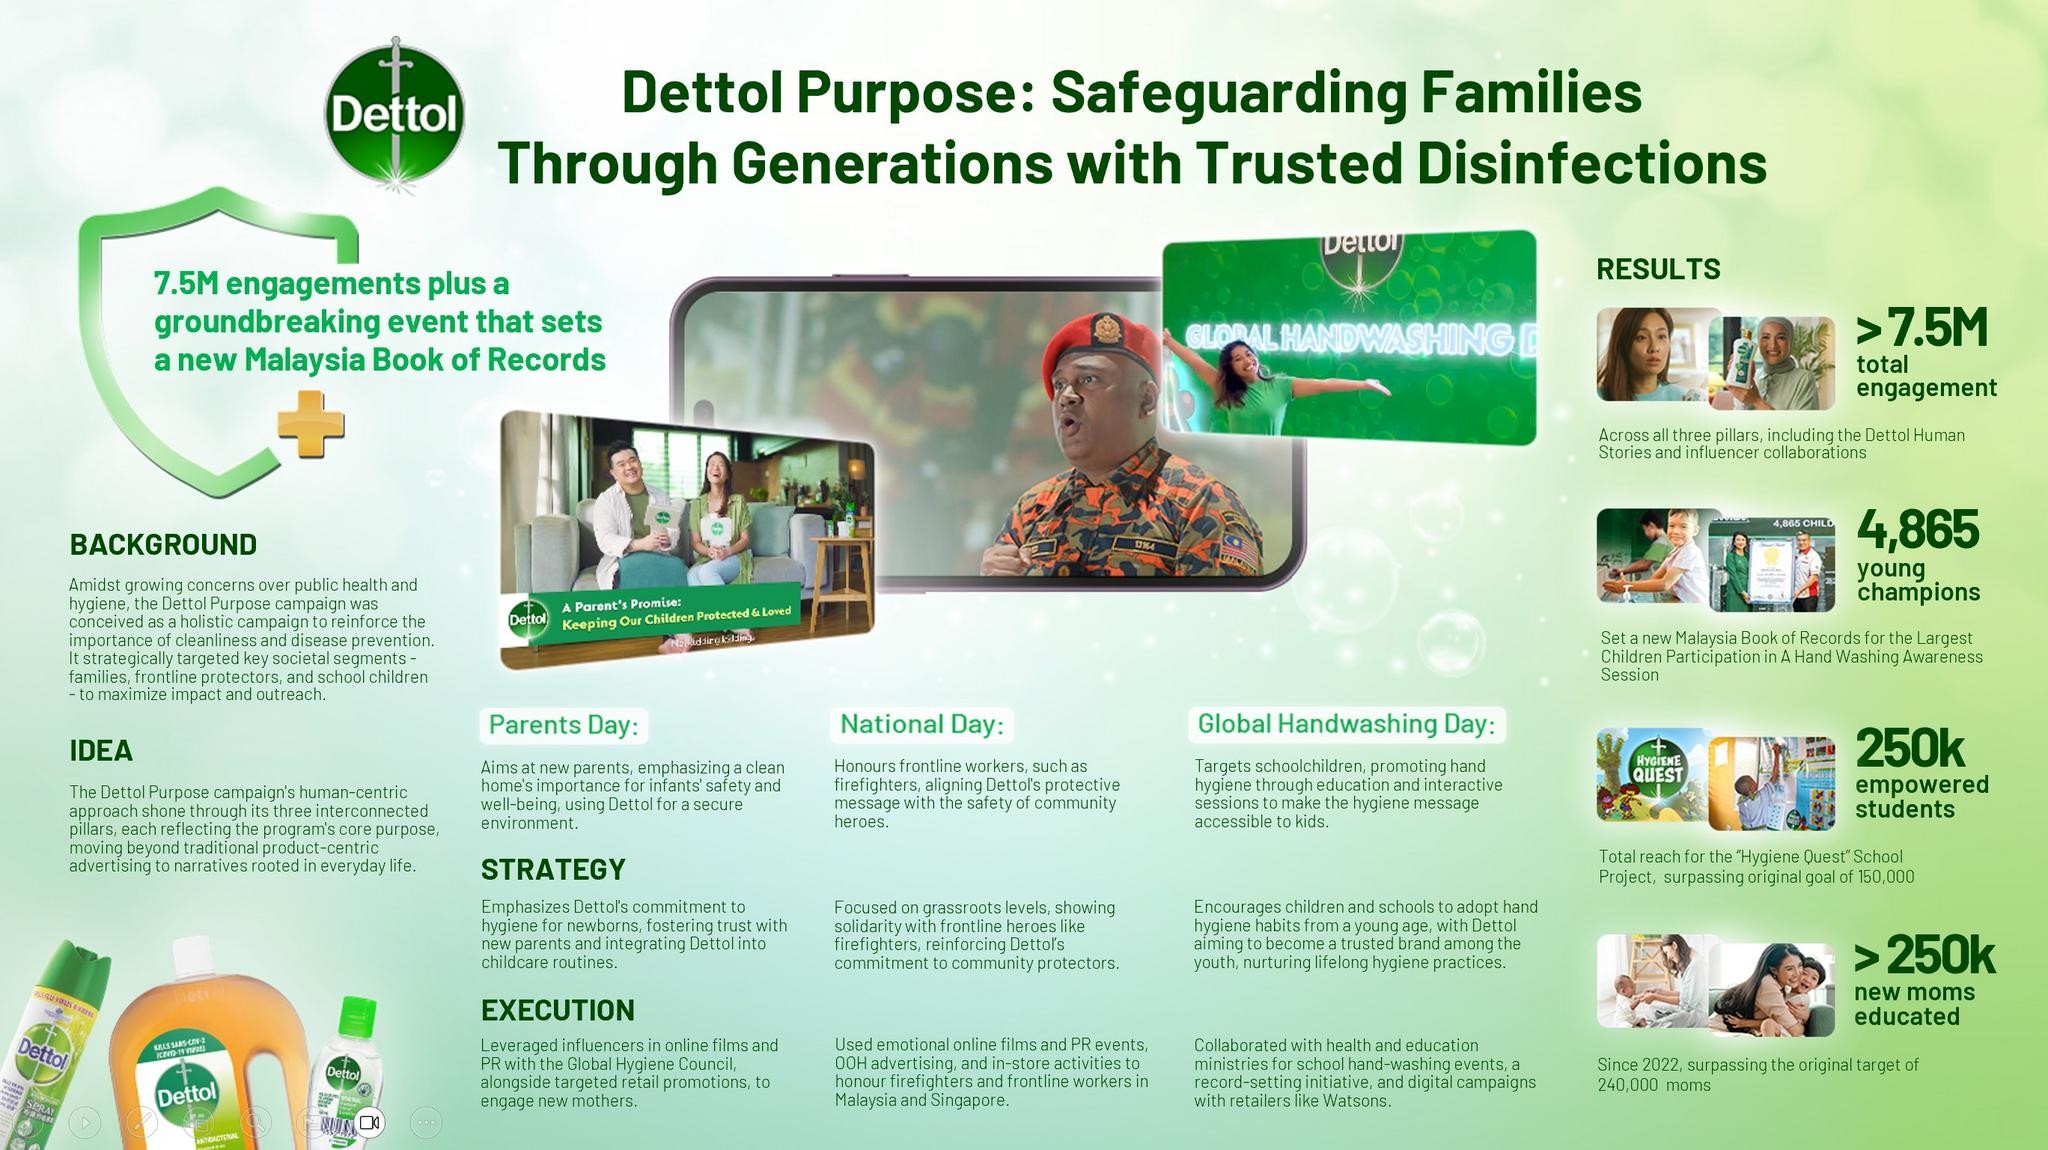 Dettol Purpose: Safeguarding families through generations with trusted disinfection